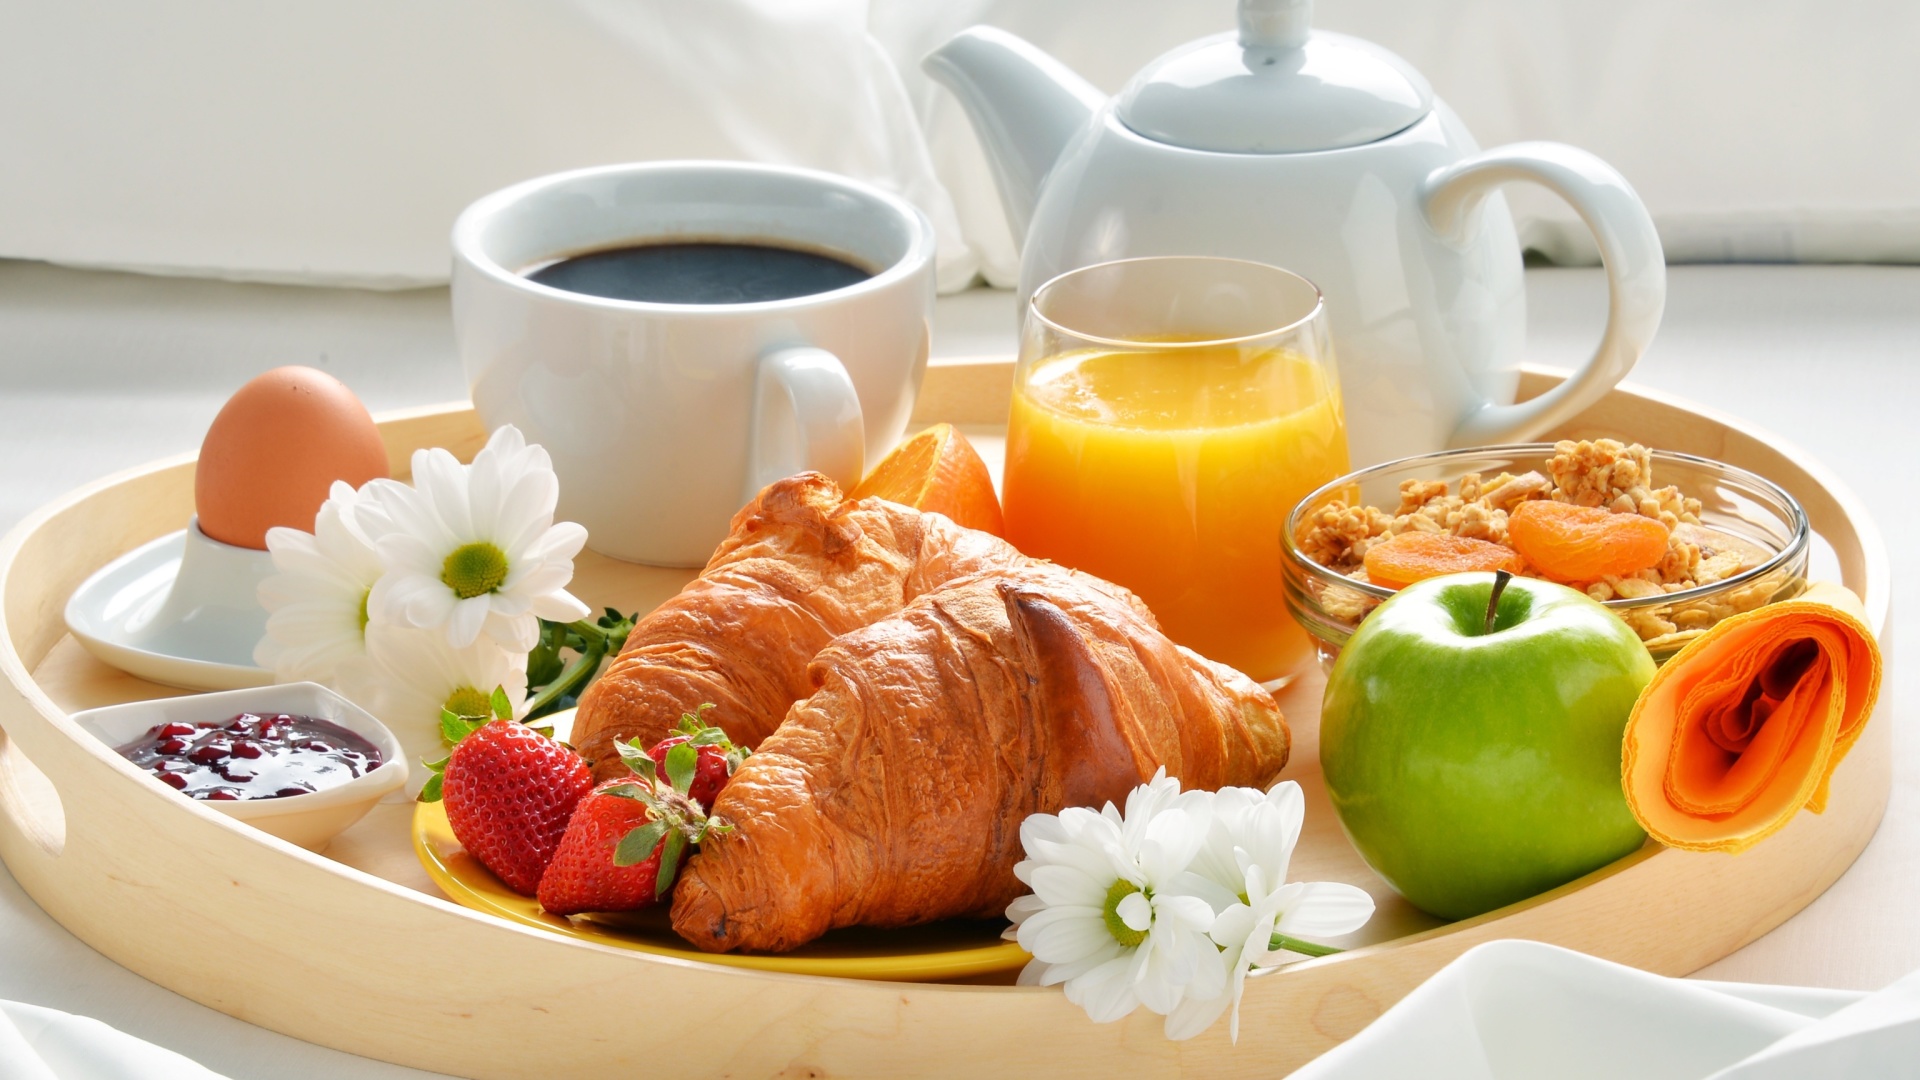 Breakfast with croissant and musli wallpaper 1920x1080